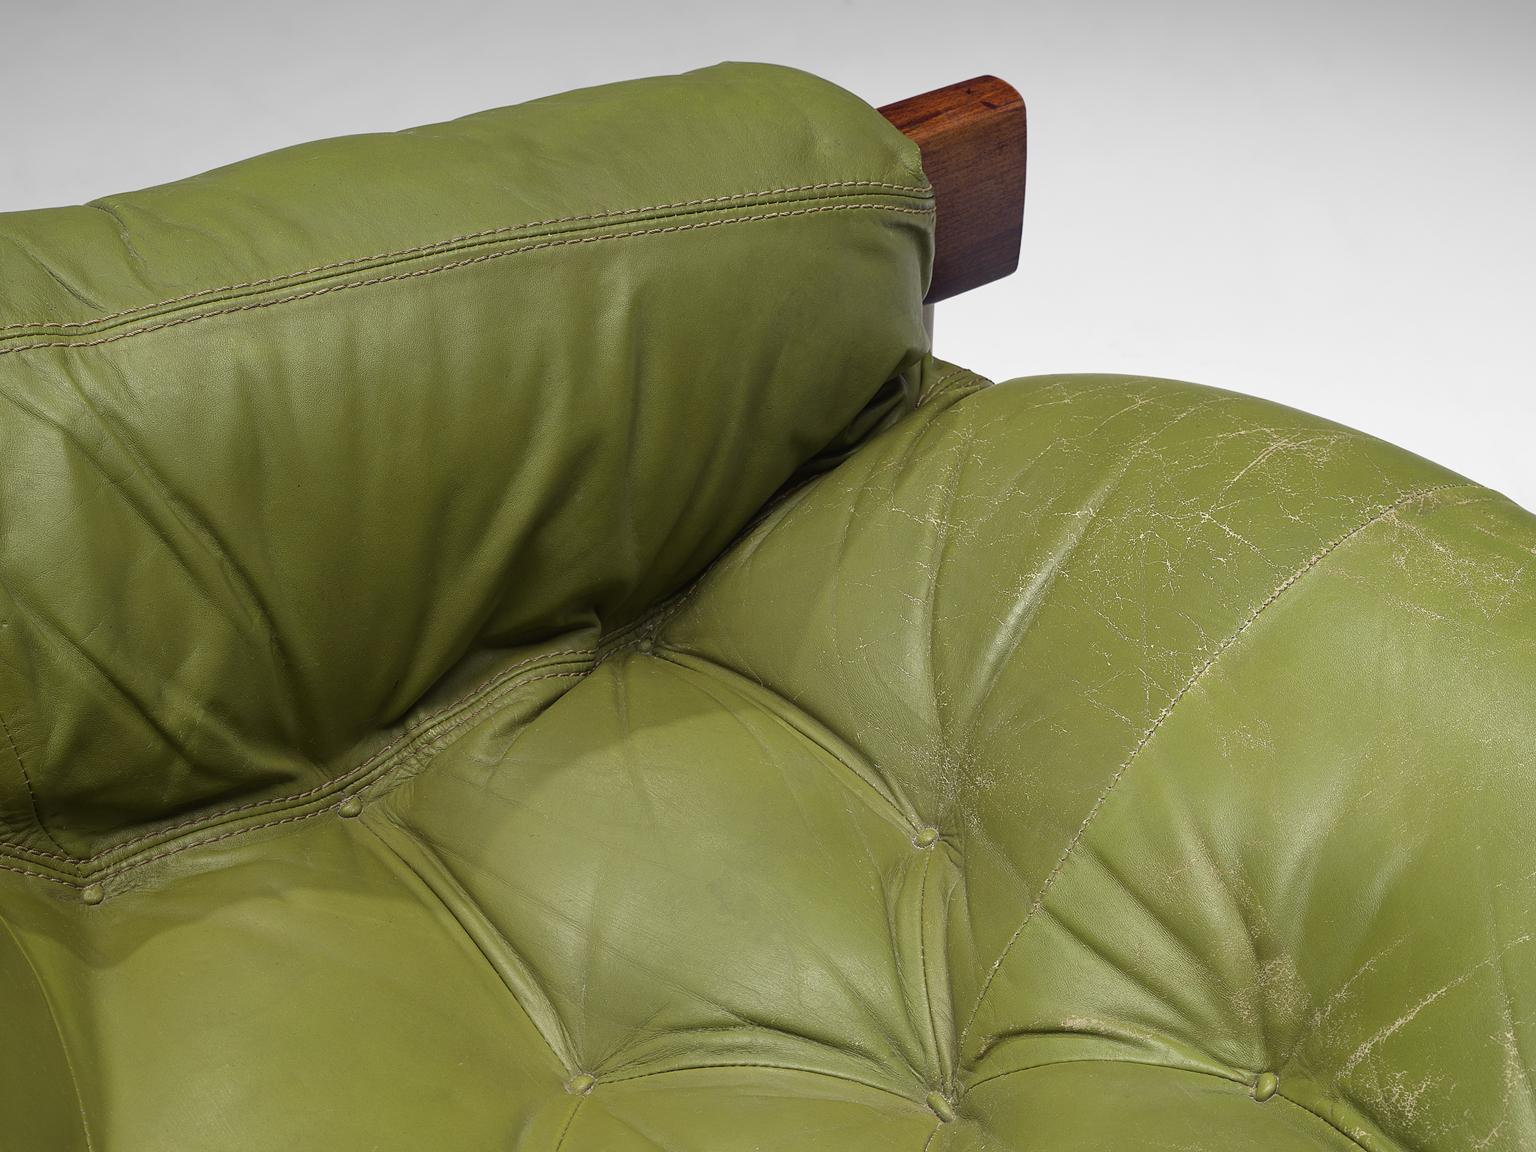 Mid-20th Century Percival Lafer Brazilian Sofa with Green Leather